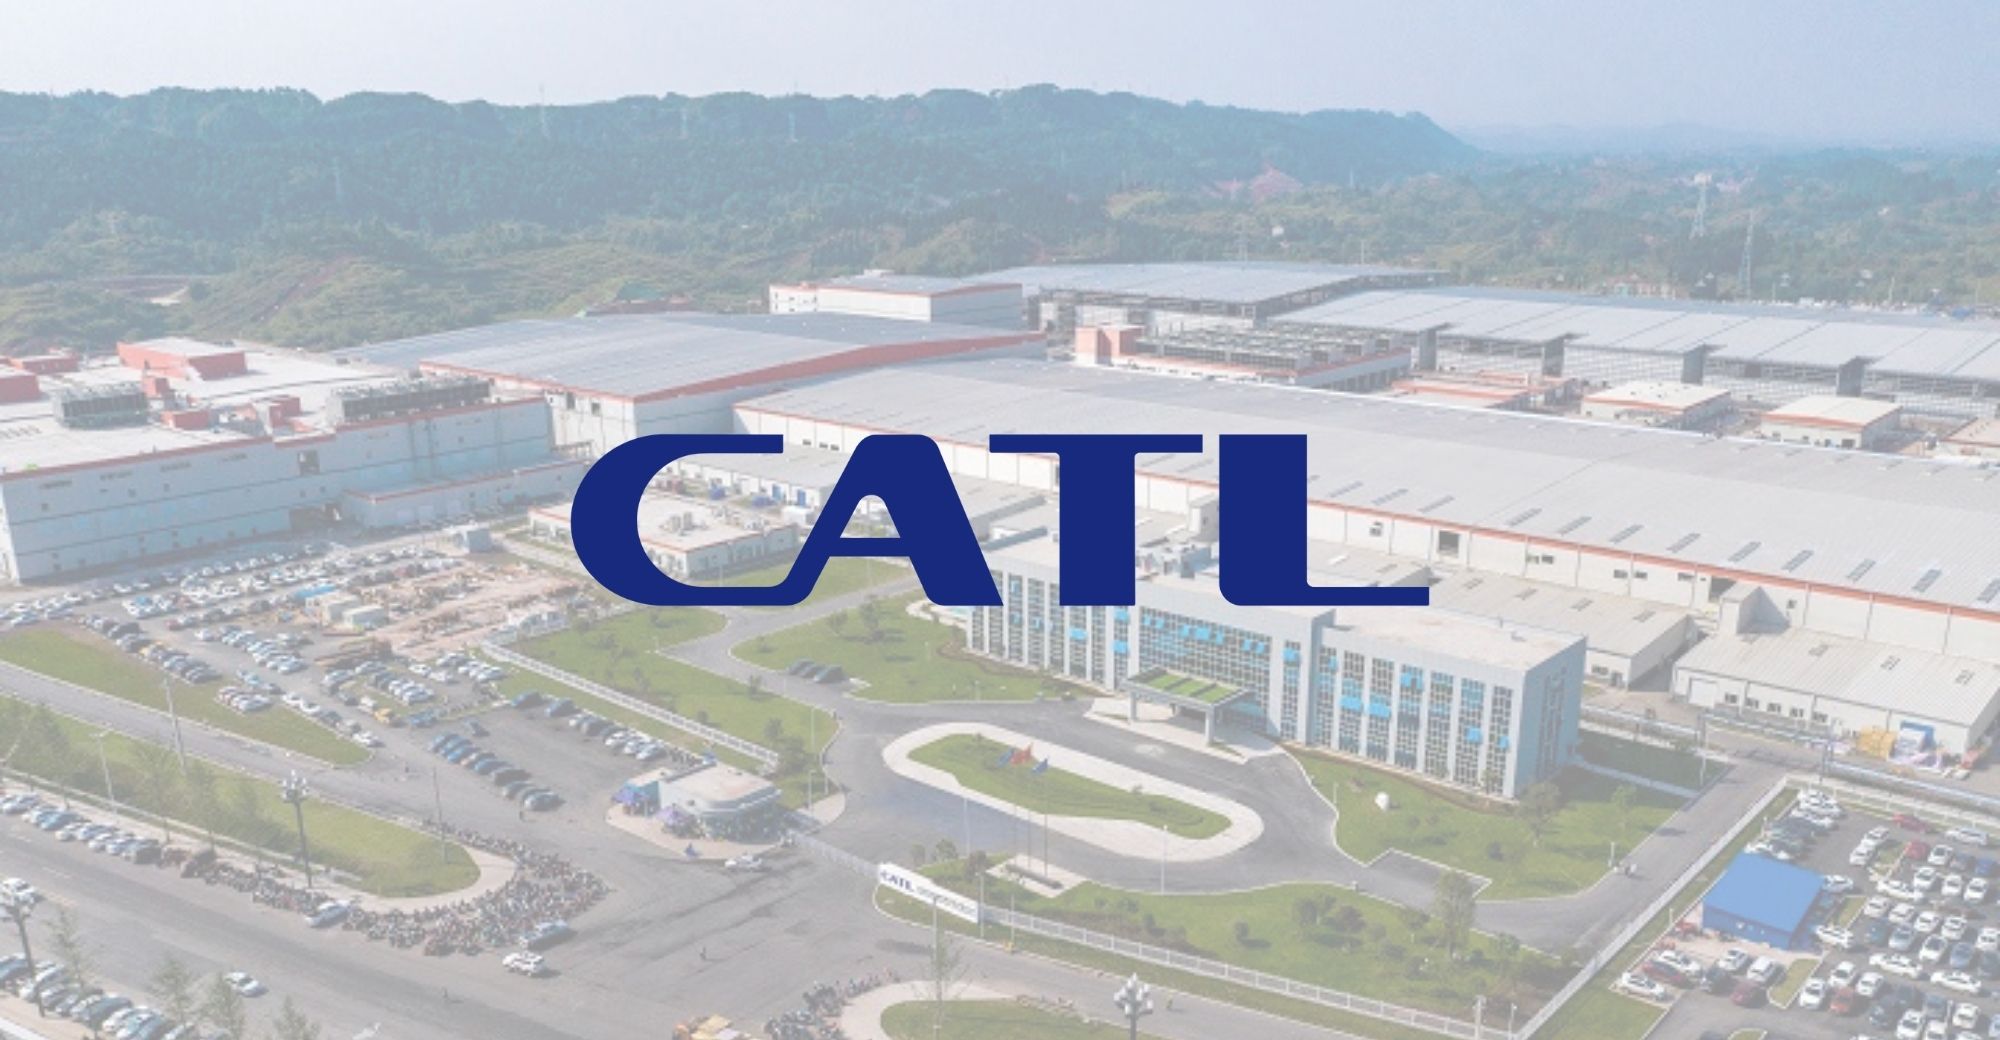 The News States that CATL’s Beijing Factory Has Started Construction